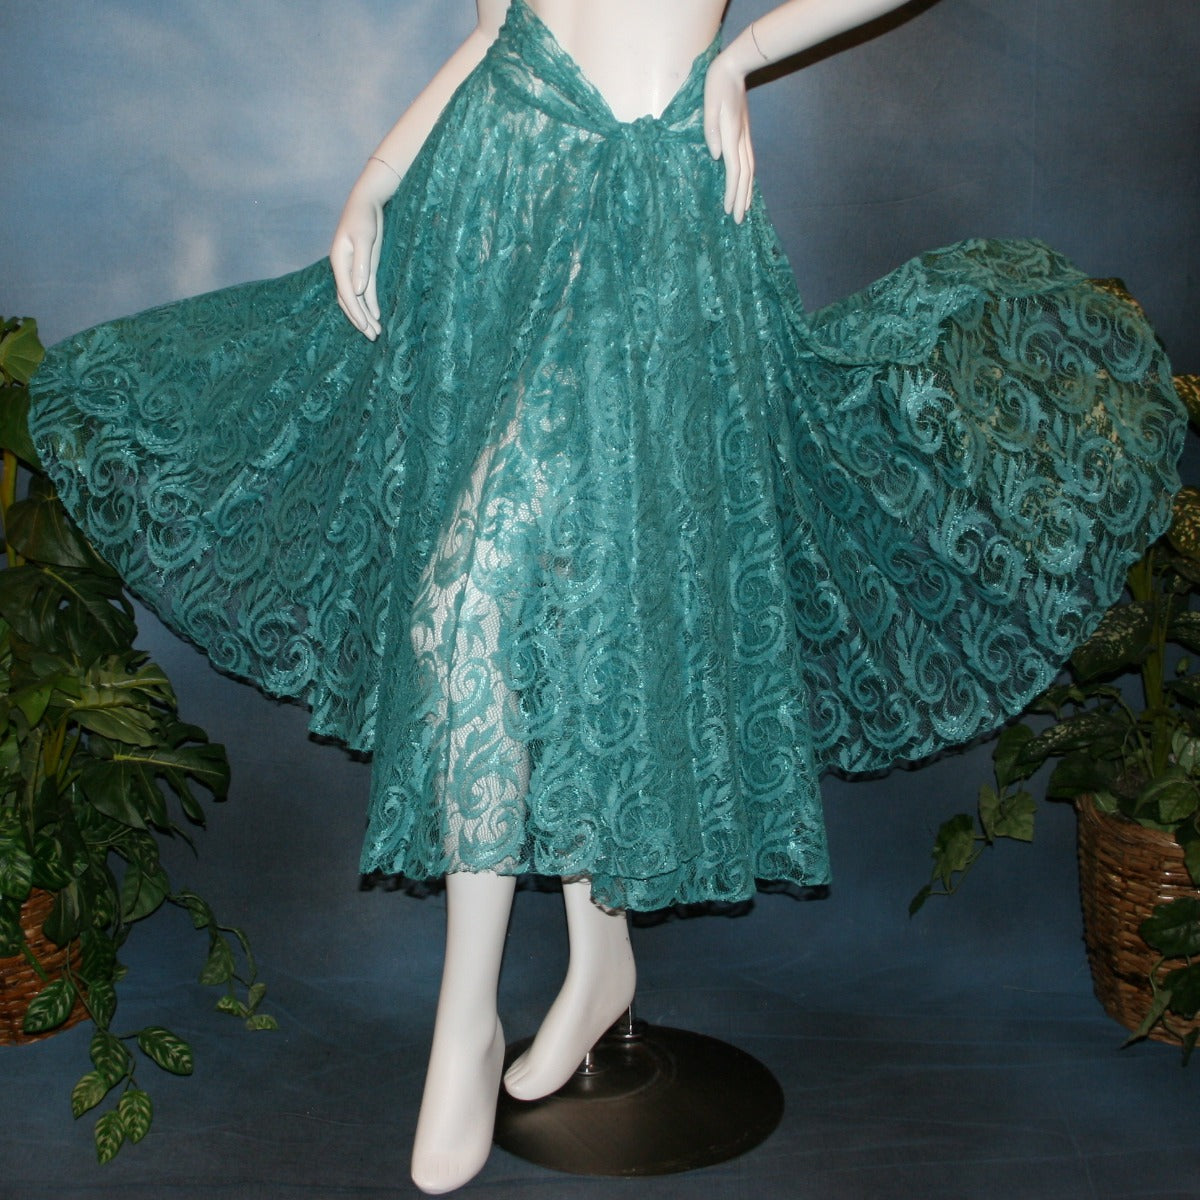 Crystal's Creations Aqua lace ballroom skirt, wrap style, was created with yards of aqua lace, many panels shaped like large petals.